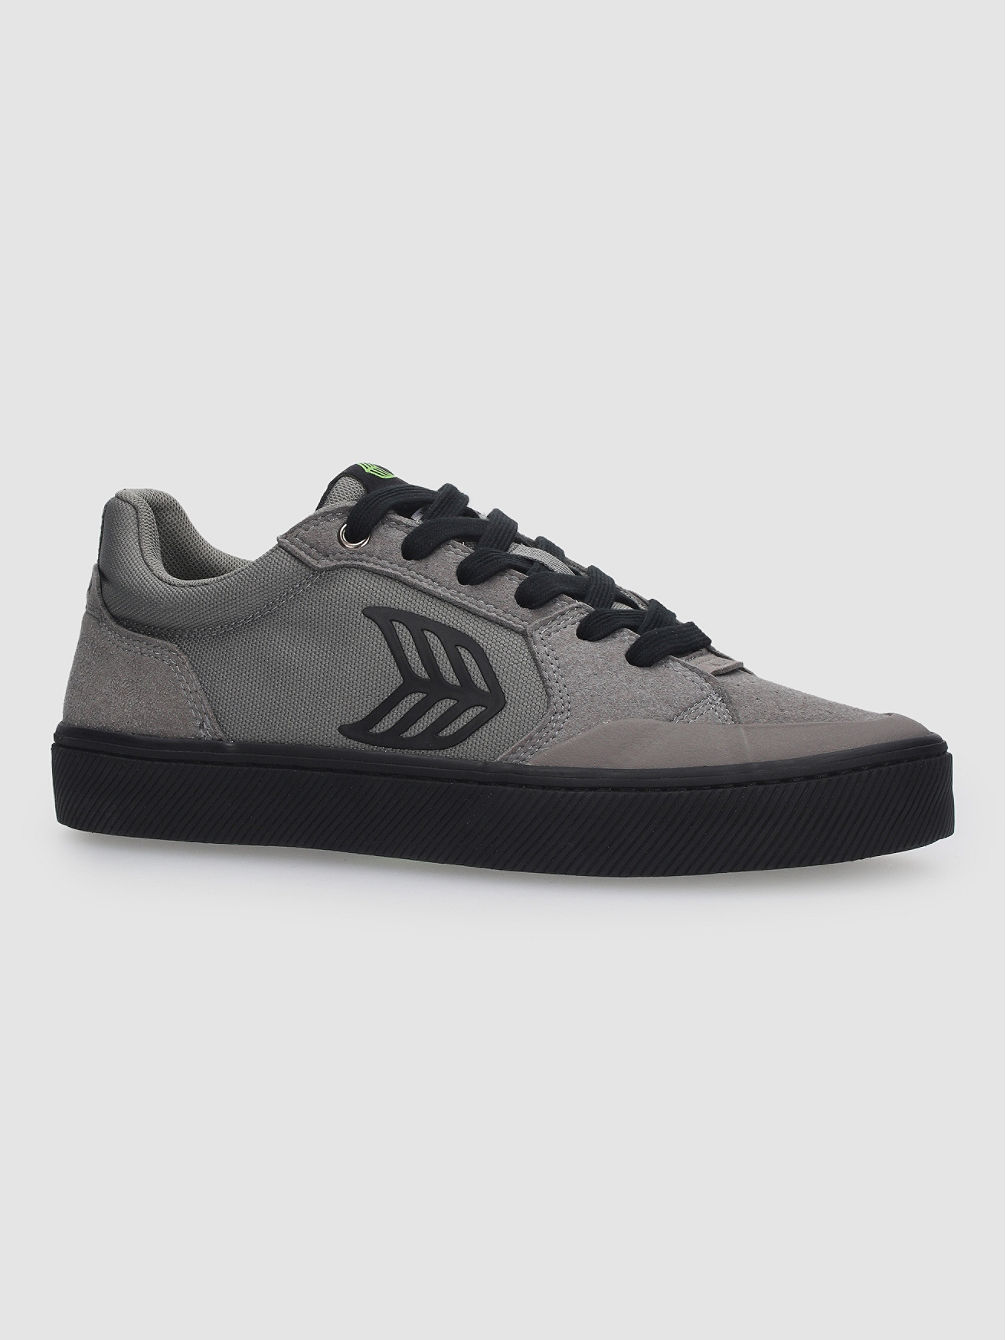 The Vallely Chaussures de skate